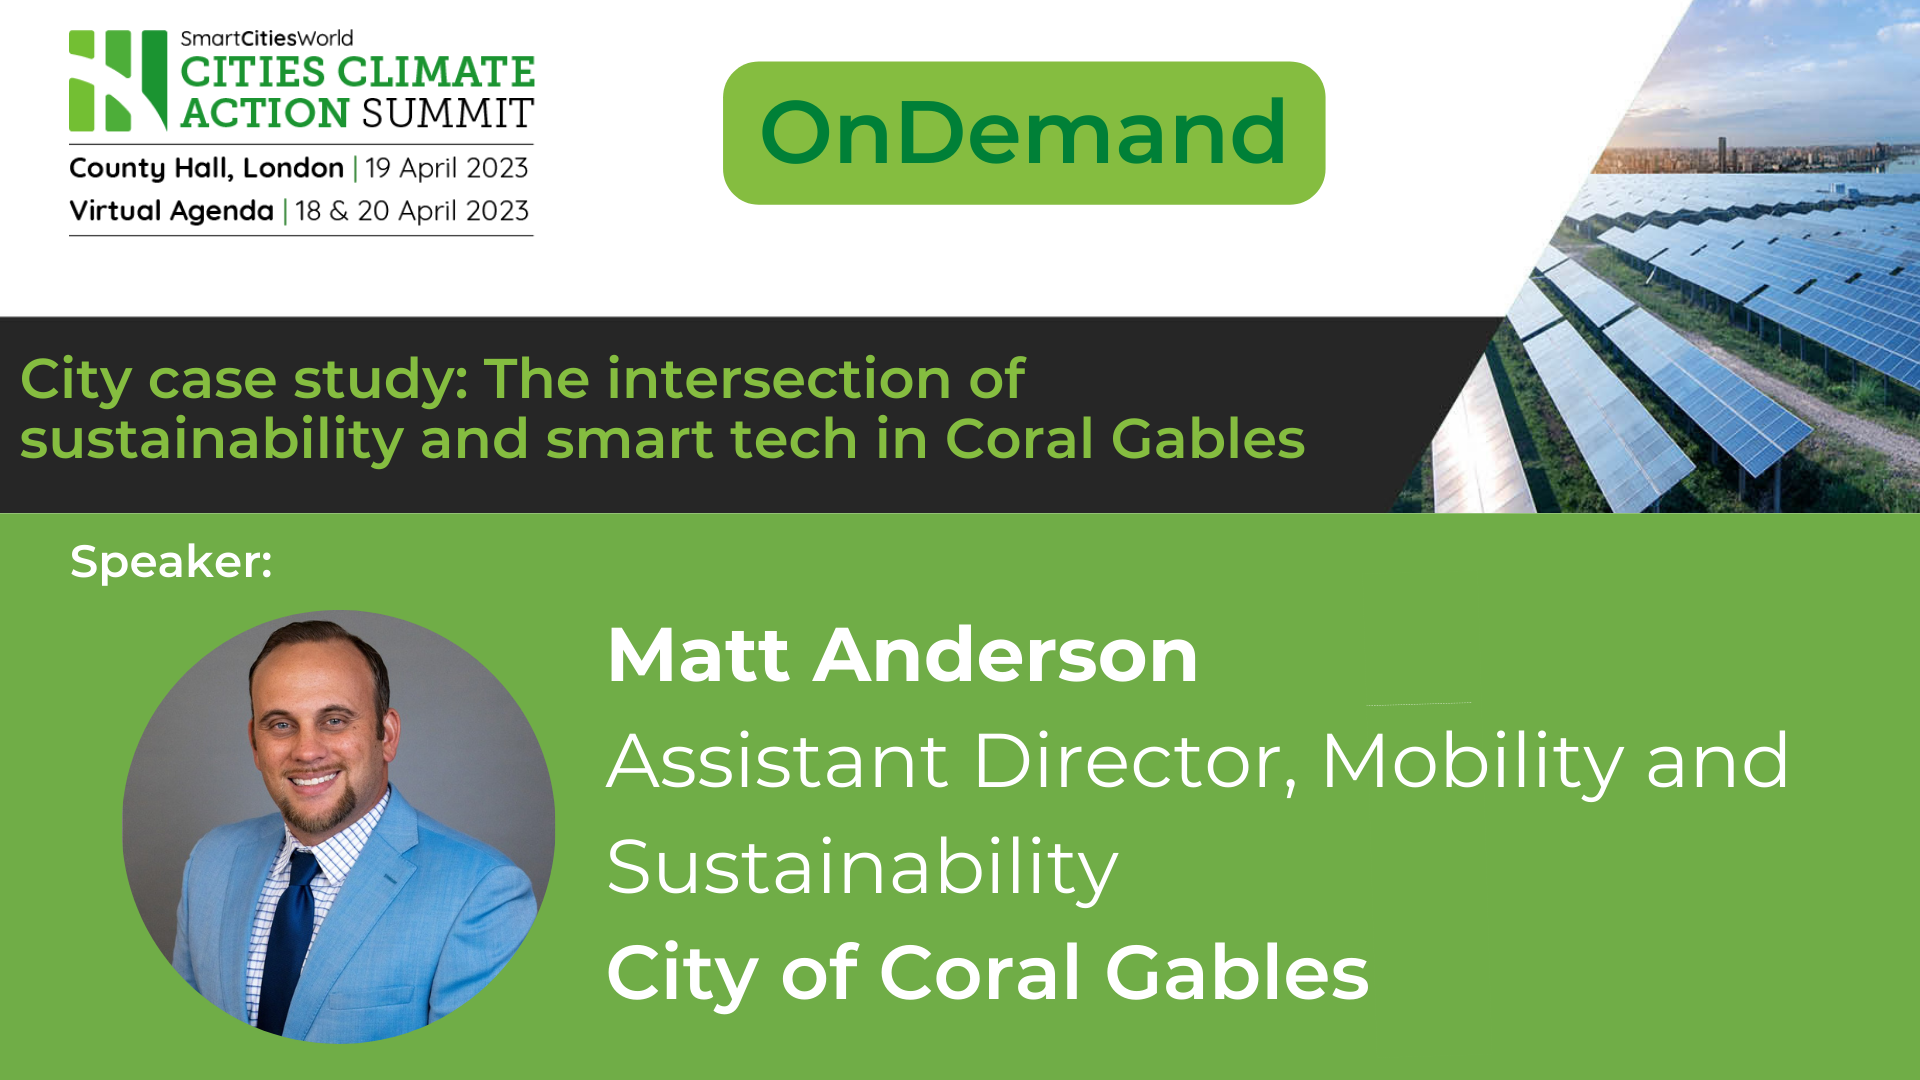 OnDemand Case study: The intersection of sustainability and smart tech in Coral Gables